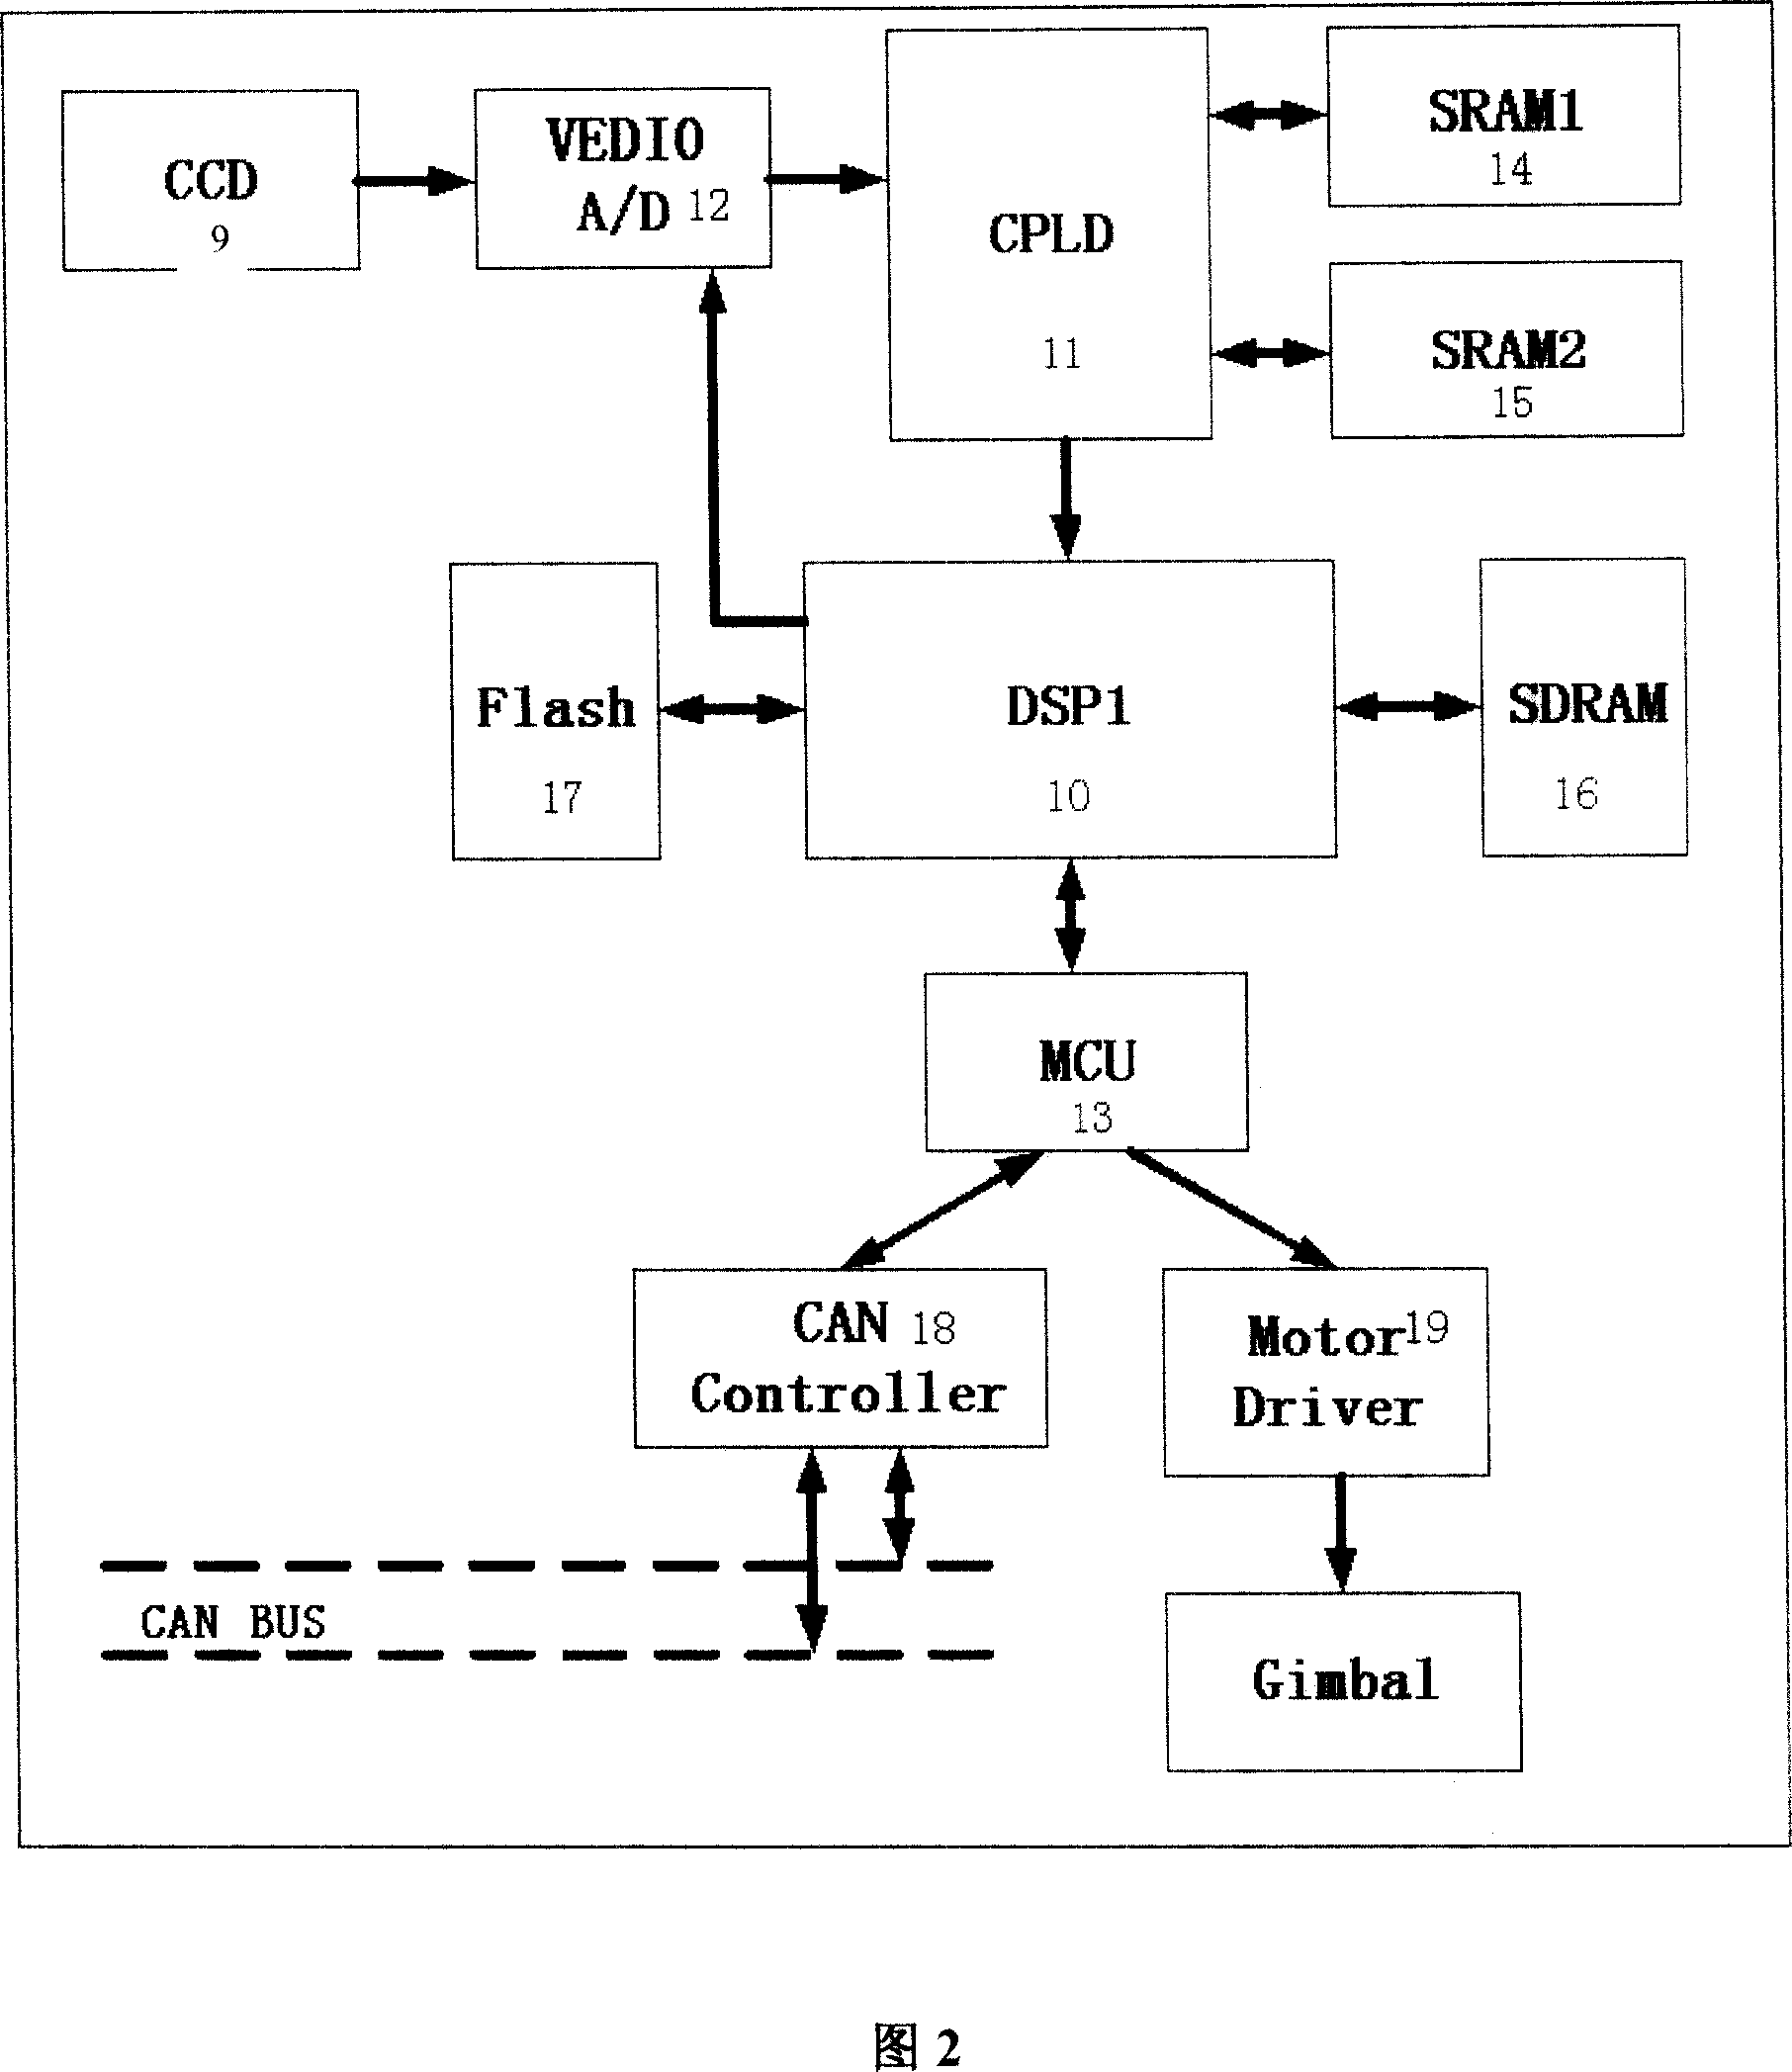 Full digital space optic communication array signal diversity receiving system